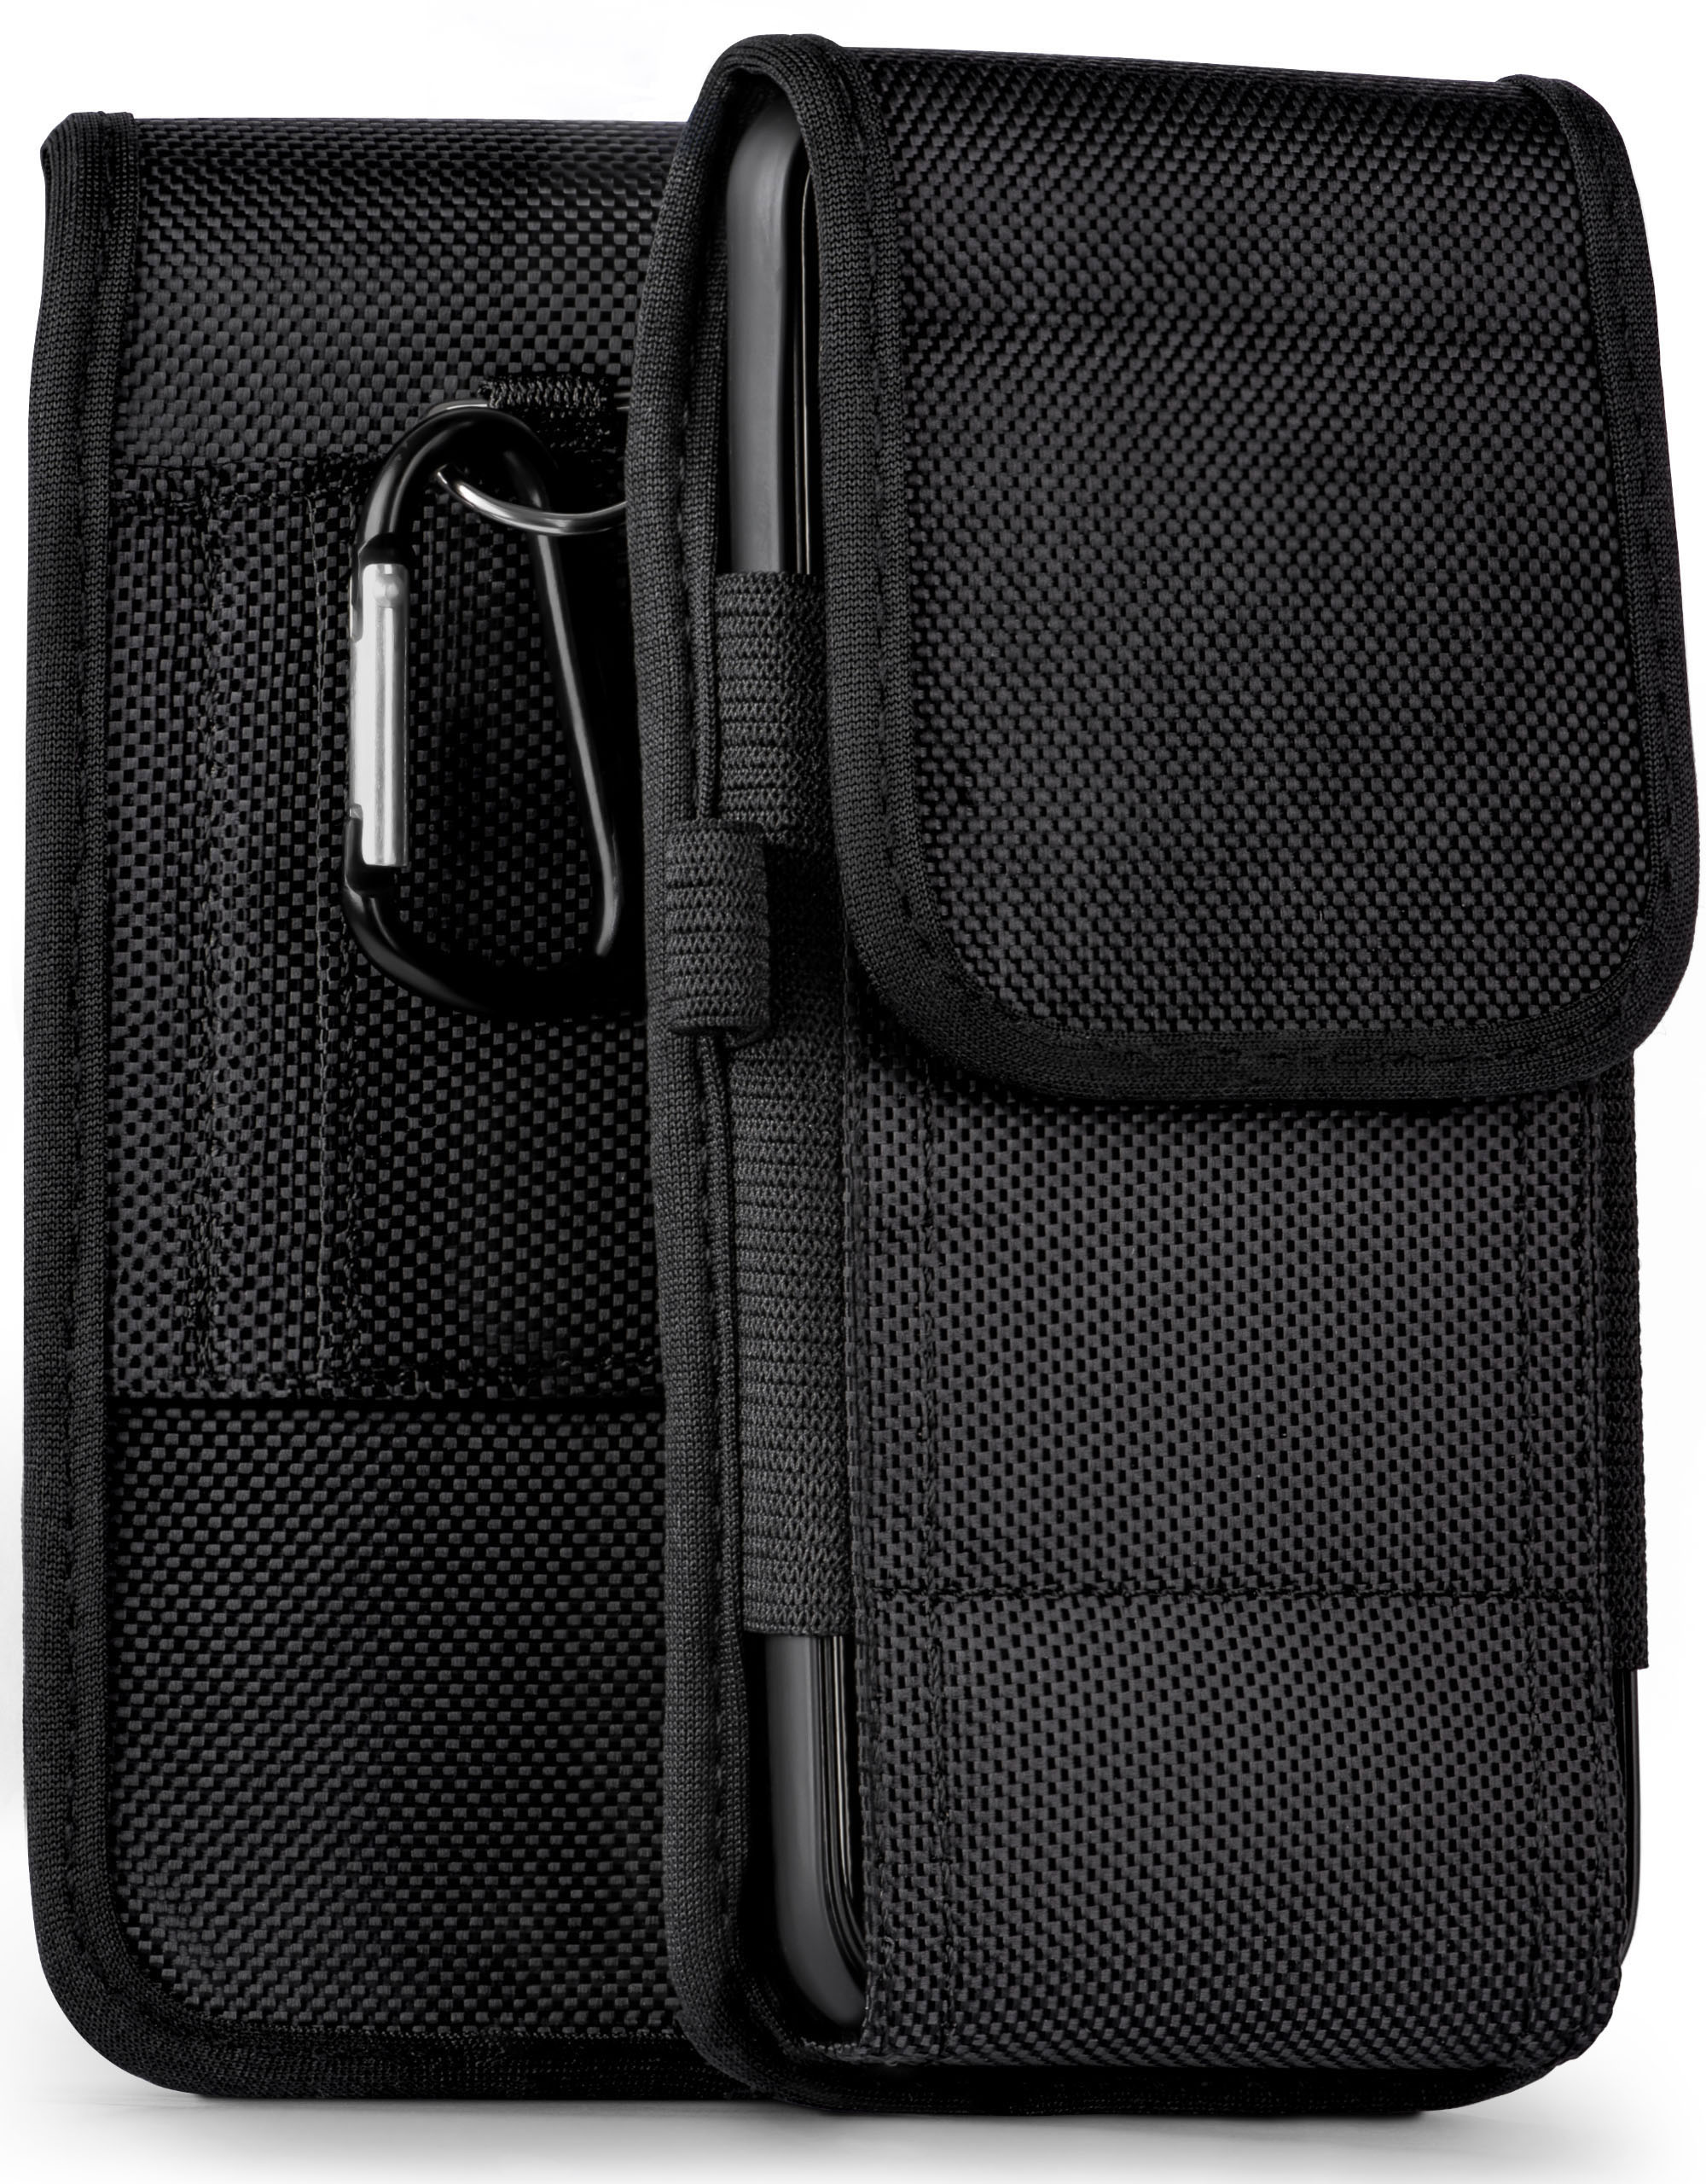 CAT, S52, Holster, Trail Agility MOEX Case,